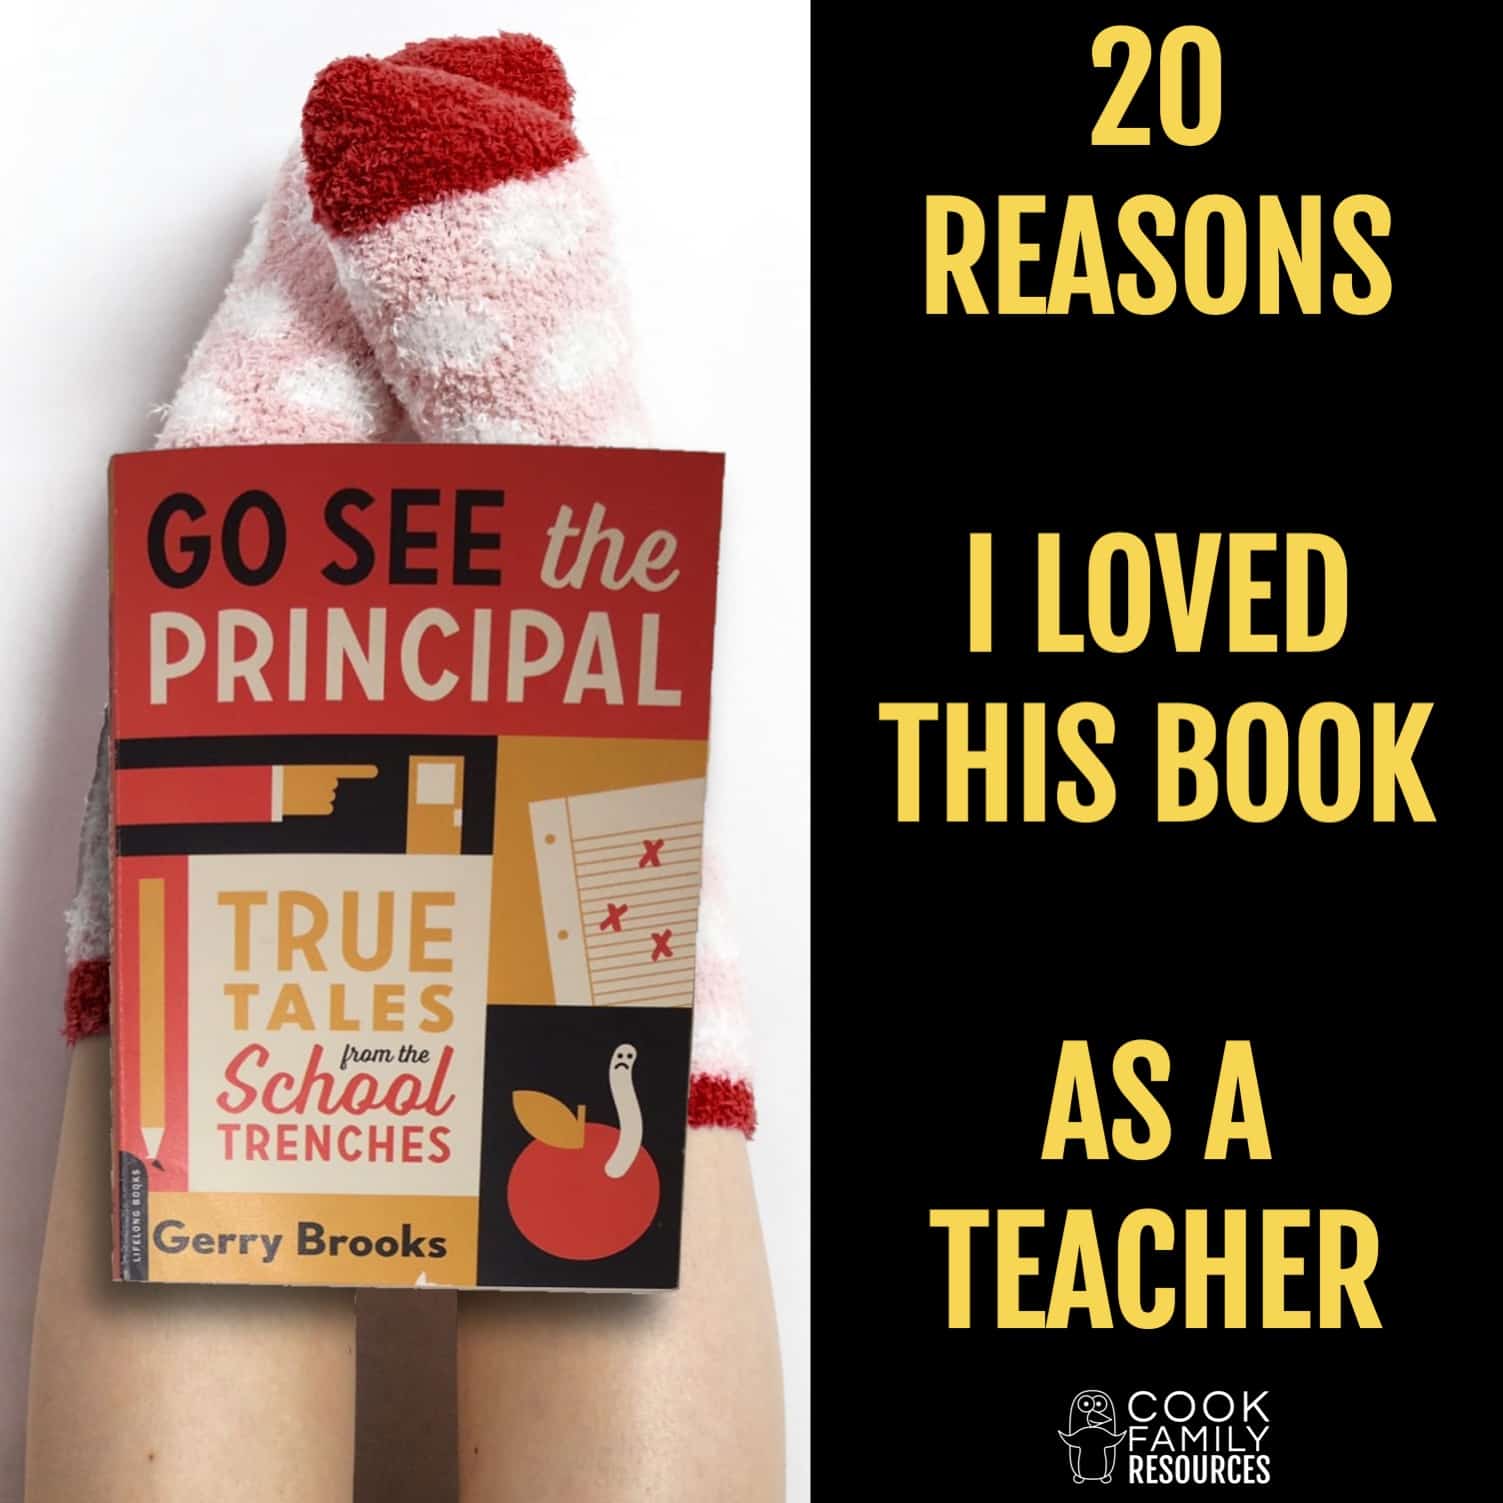 picture of two legs with comfortable fuzzy socks and the book "Go See The Principal" text reads 20 Reasons I Loved This Book As A Teacher